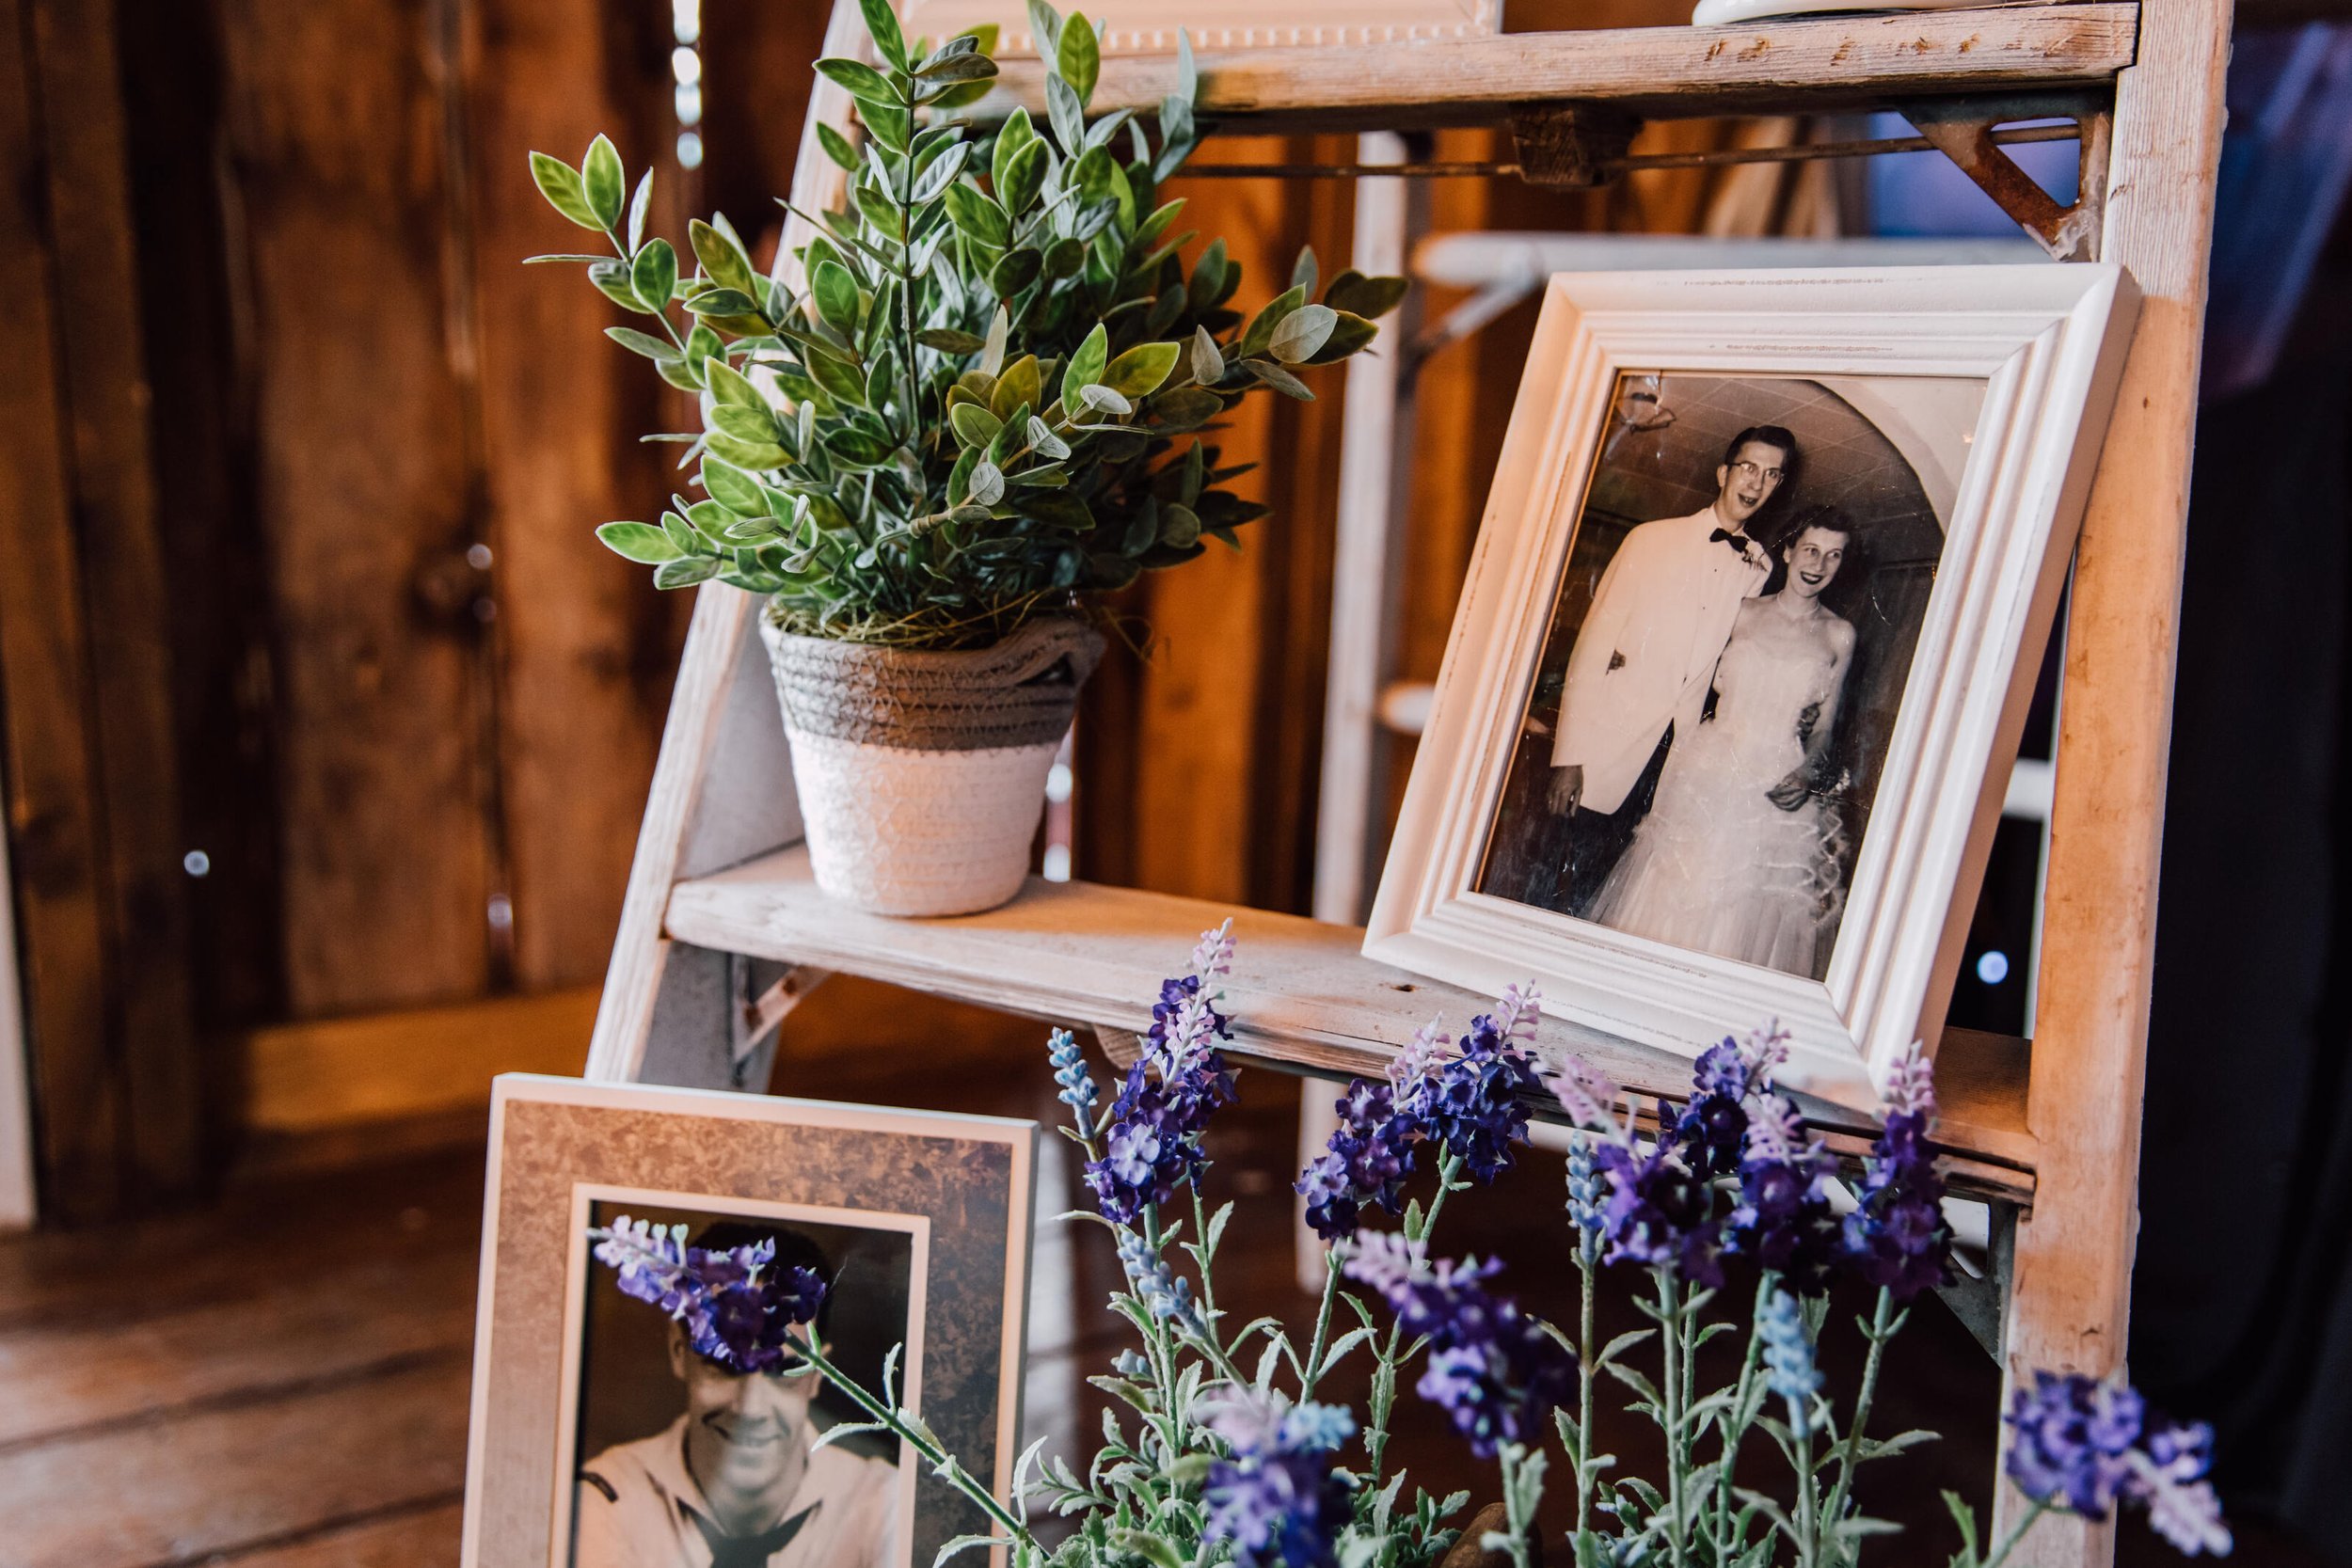  Photos of the bride and groom’s missing loved ones sit on a wooden ladder with plants at their barn wedding reception 